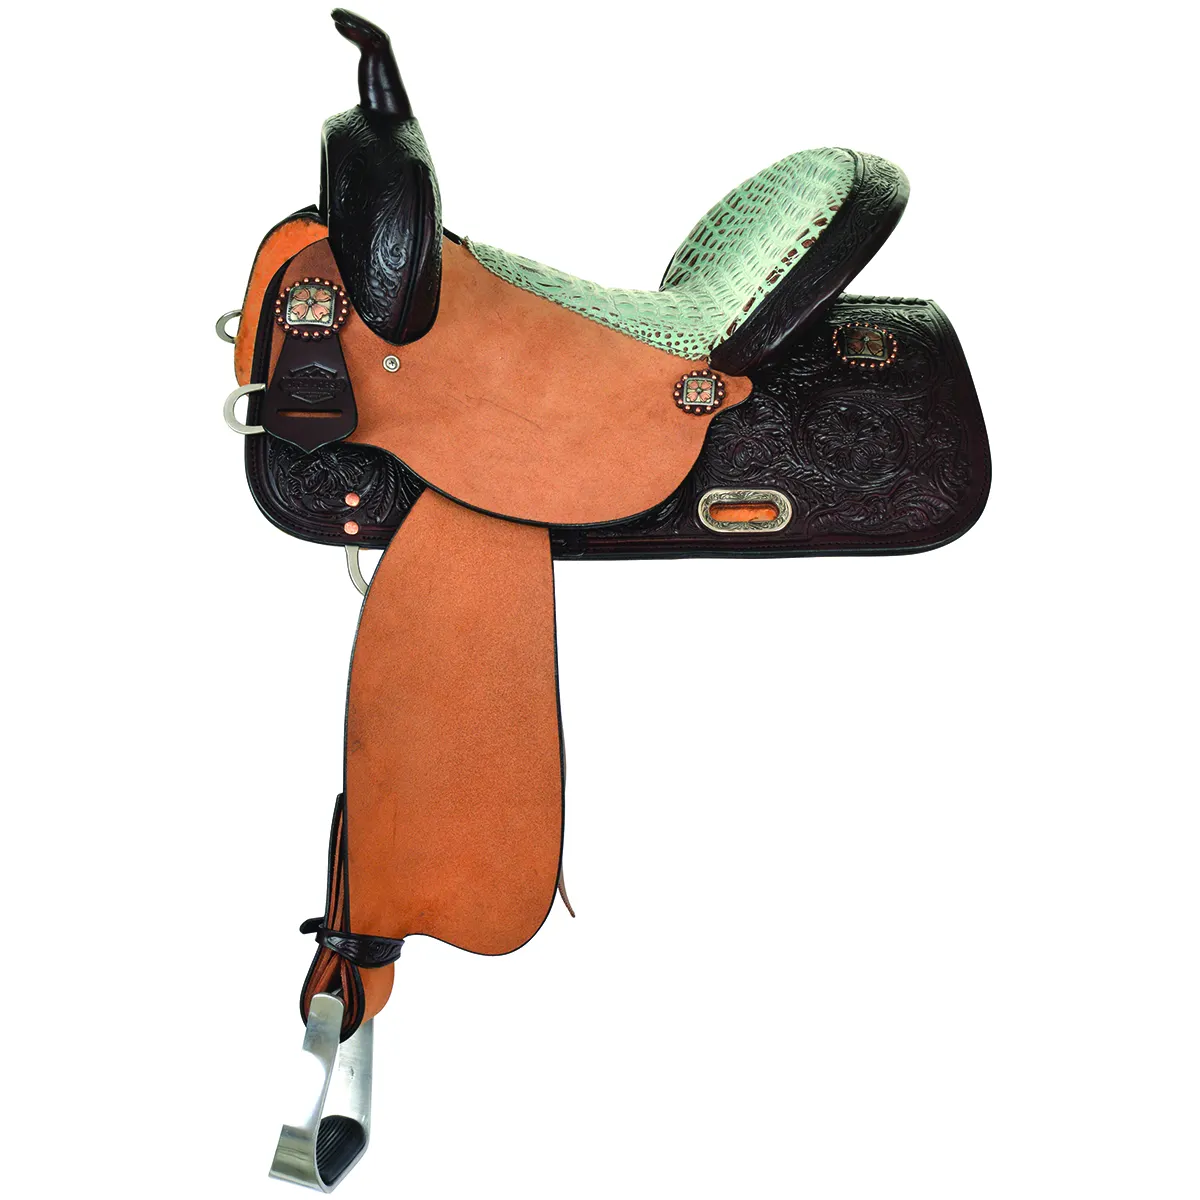 High quality Custom Made Western Horse Cow Hide Saddle with Tack Set for Horse Riding Showmanship Horsemanship